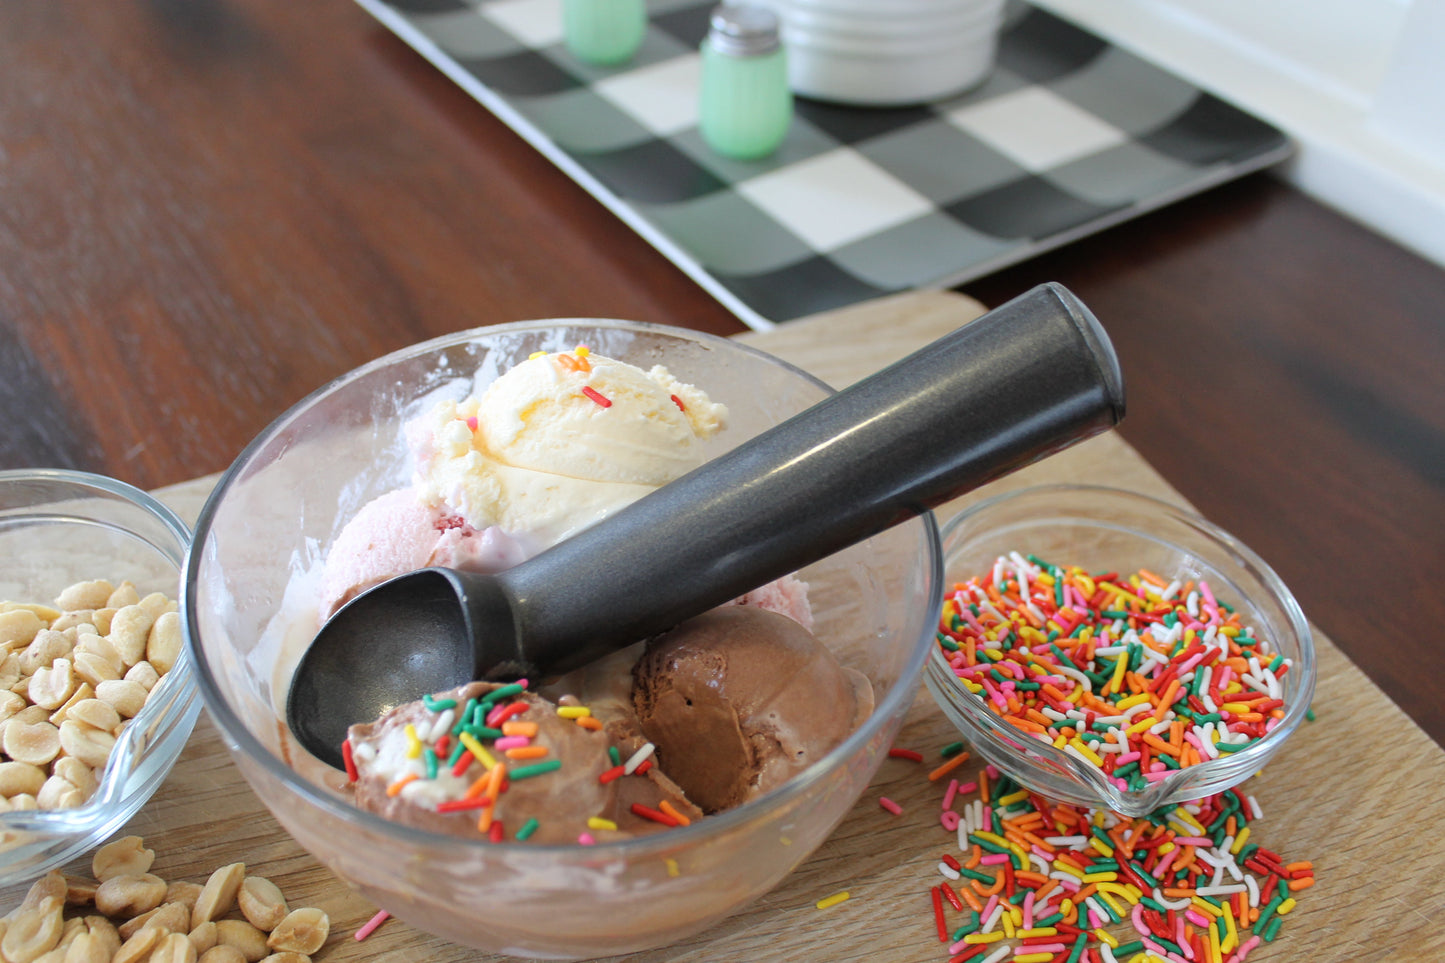 Personalized Ice Cream Scoops | Kevin Is Cool